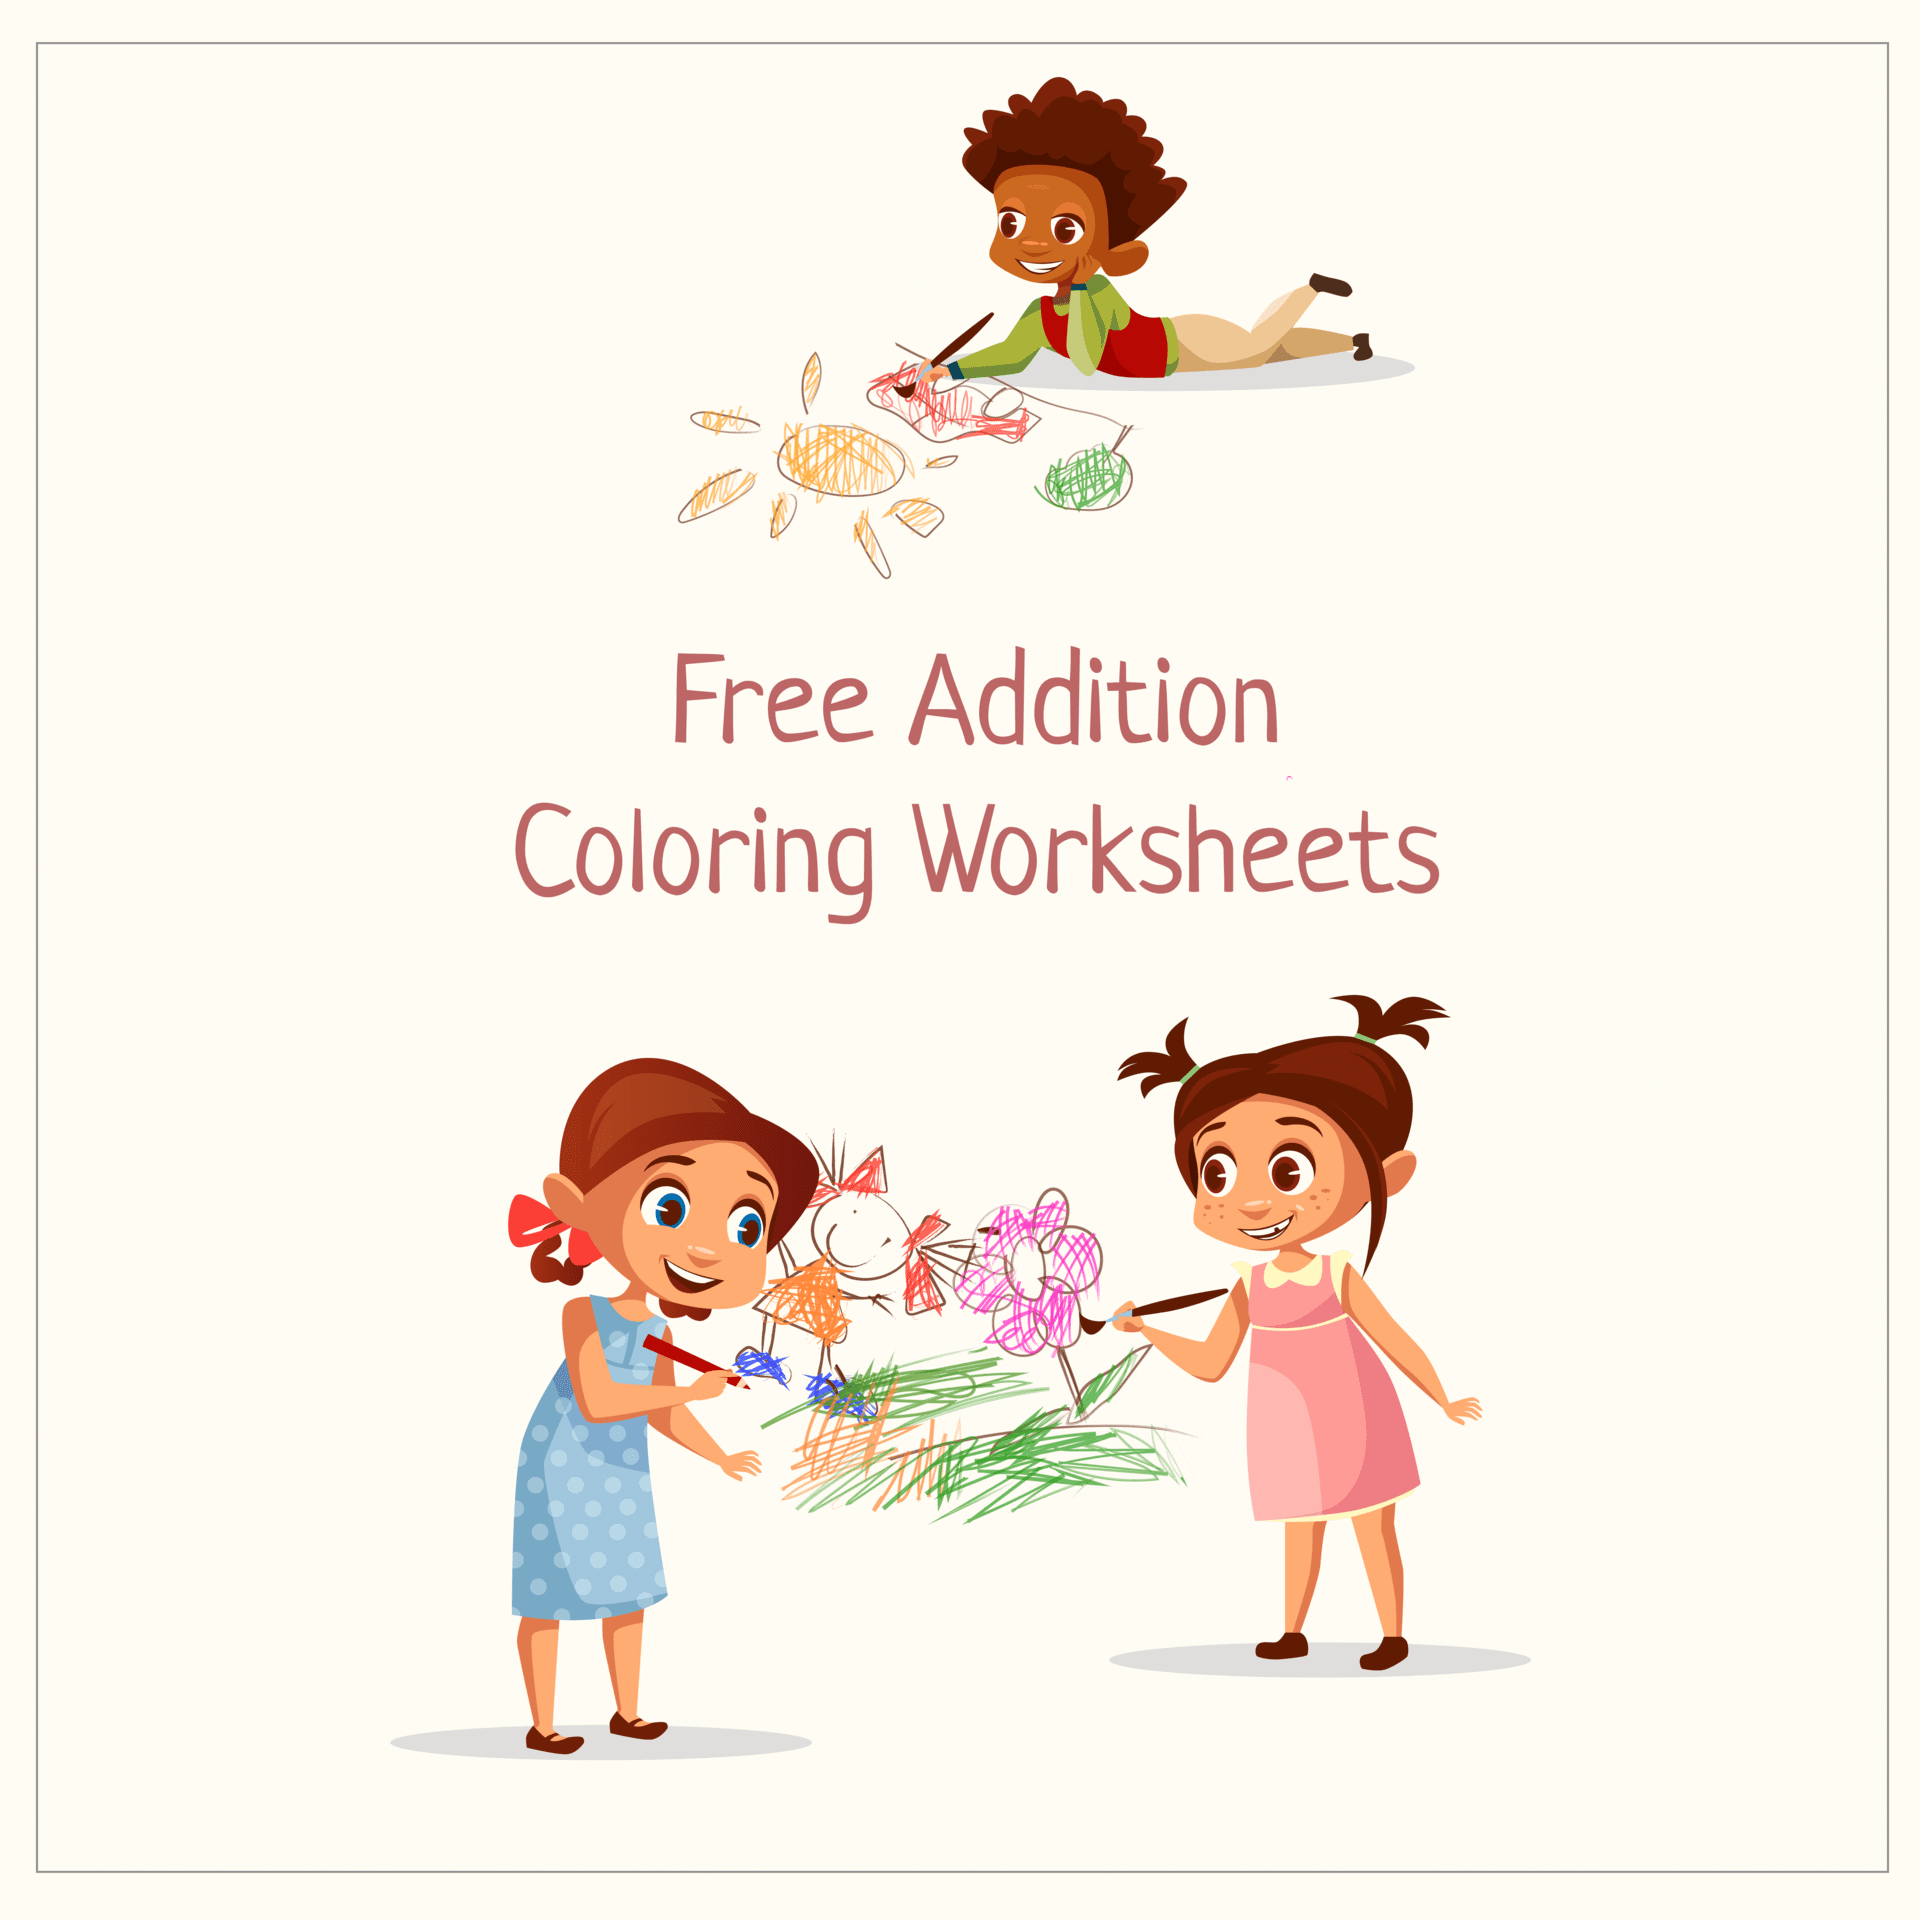 5 Free Addition Coloring Worksheets PDF